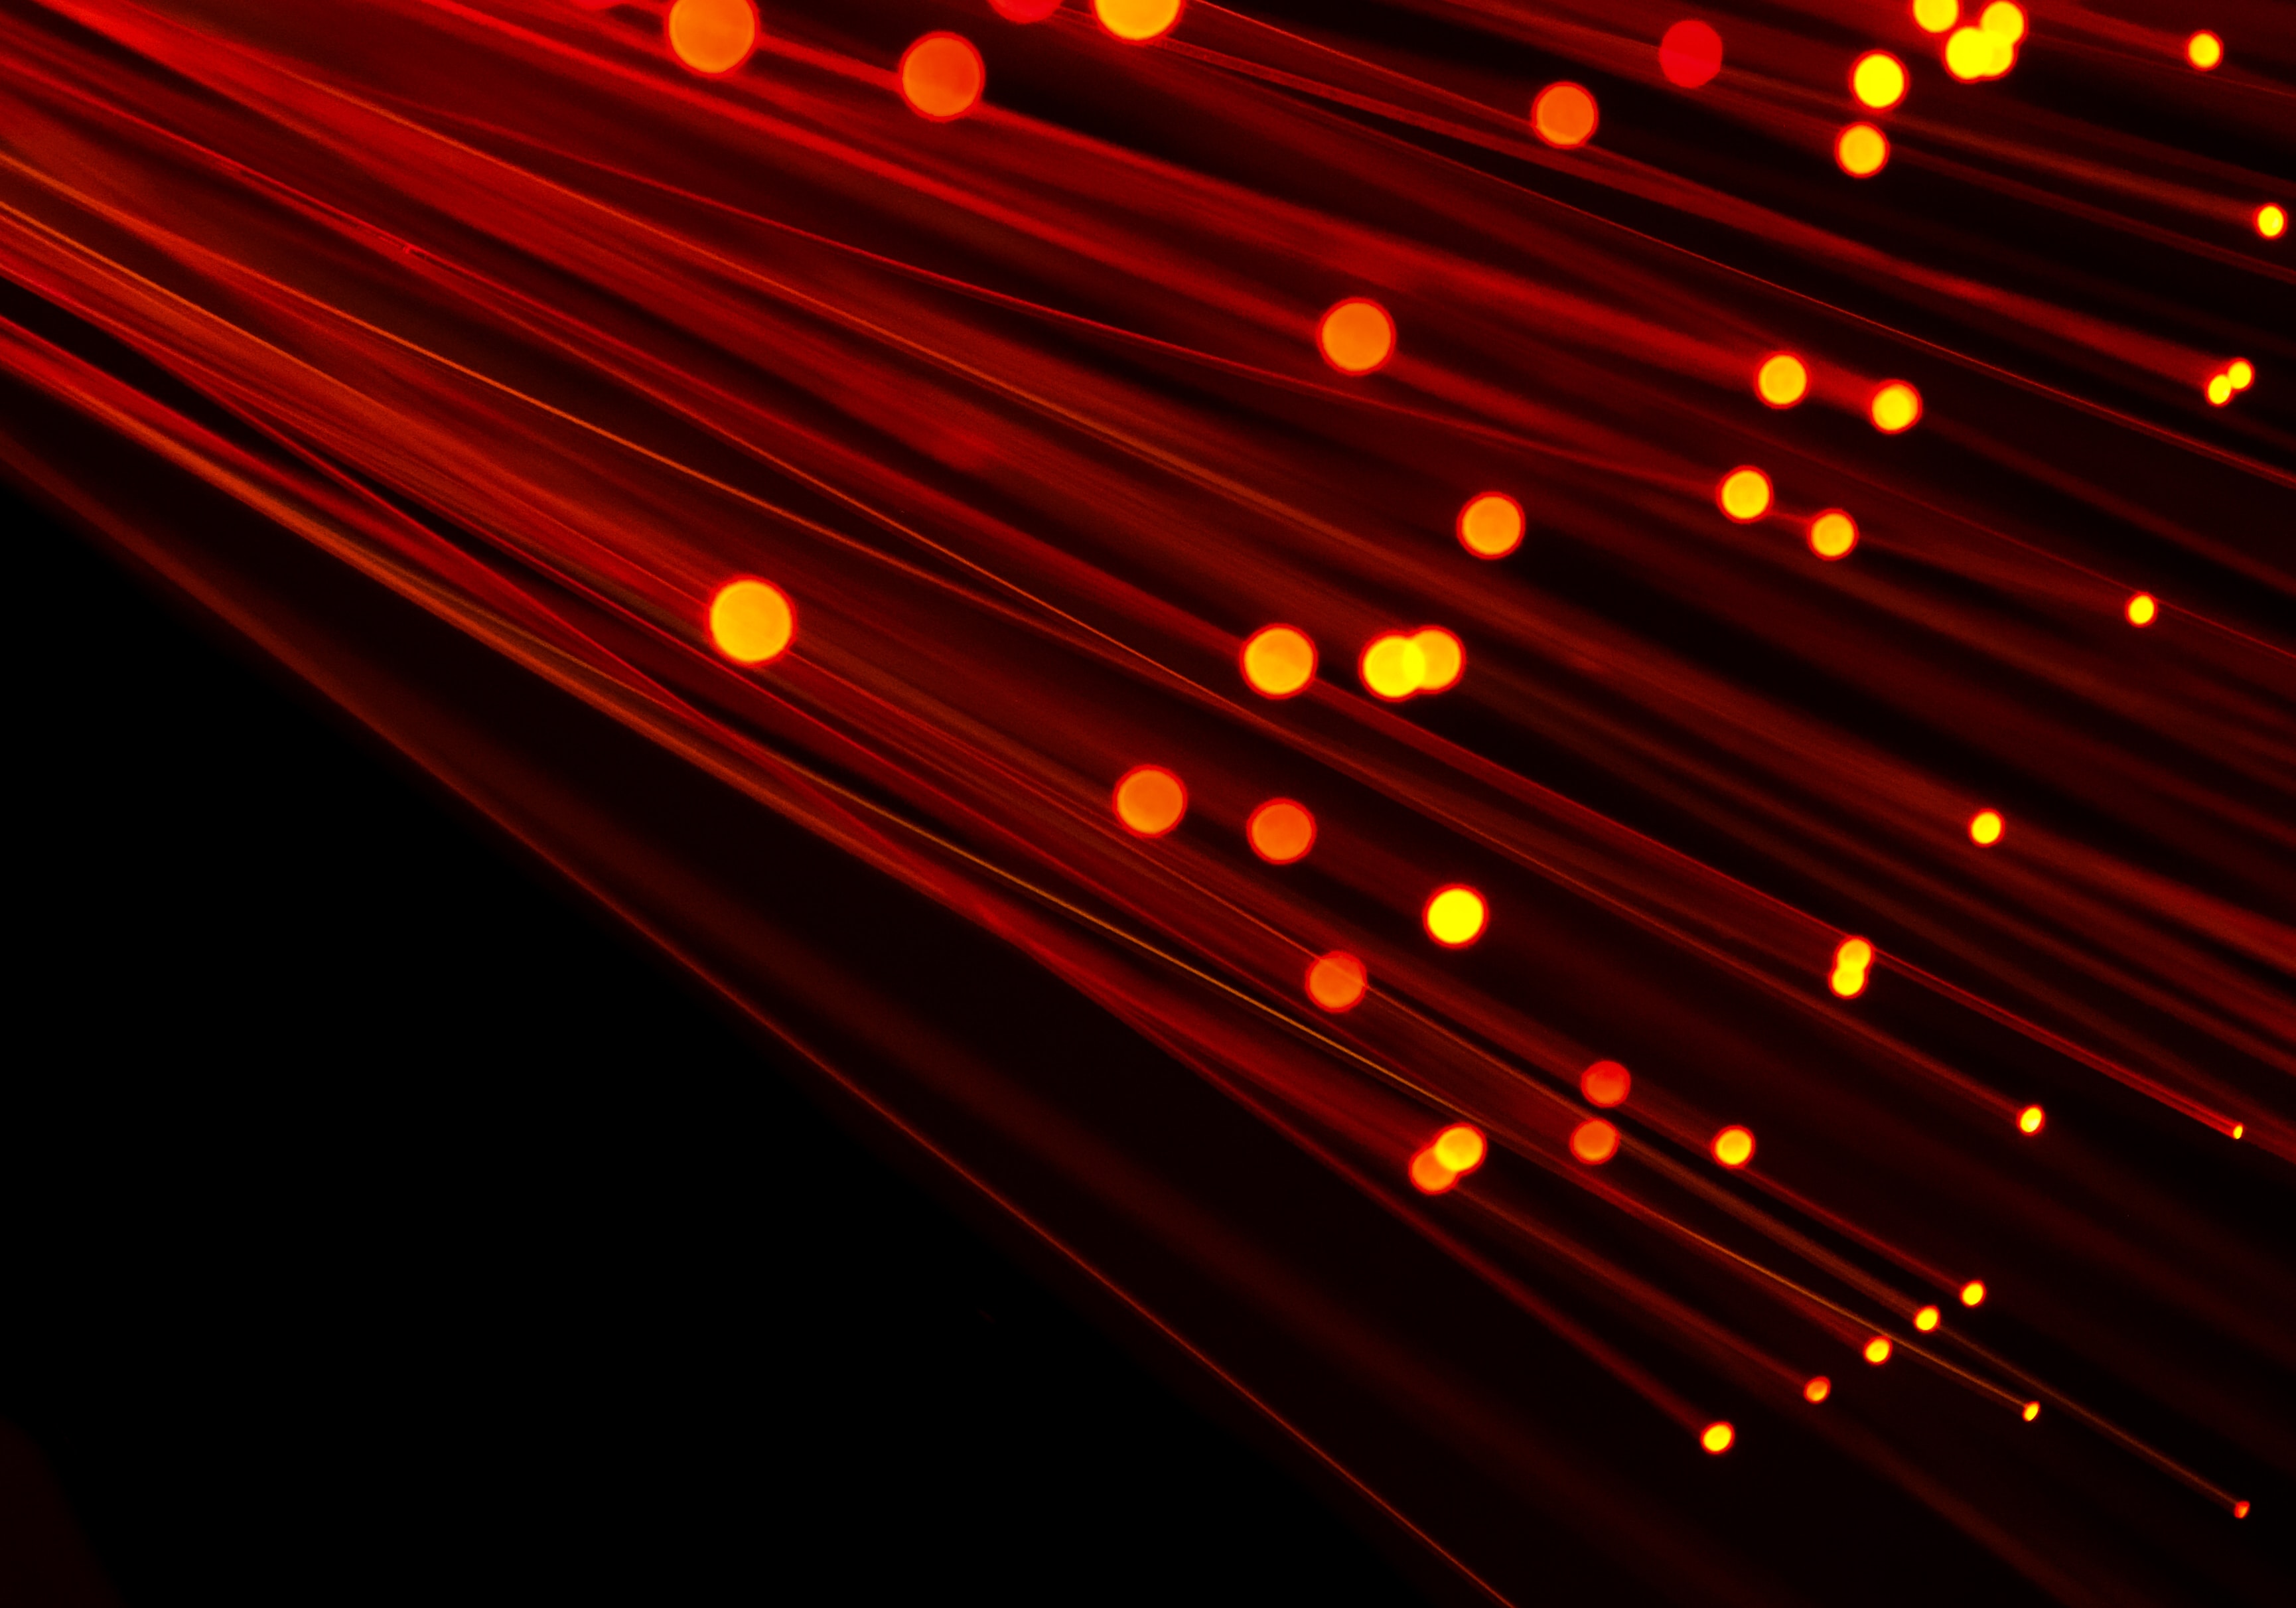 Exposed Fiber-Optic Internet cables made up of thin strands of glass or plastic.